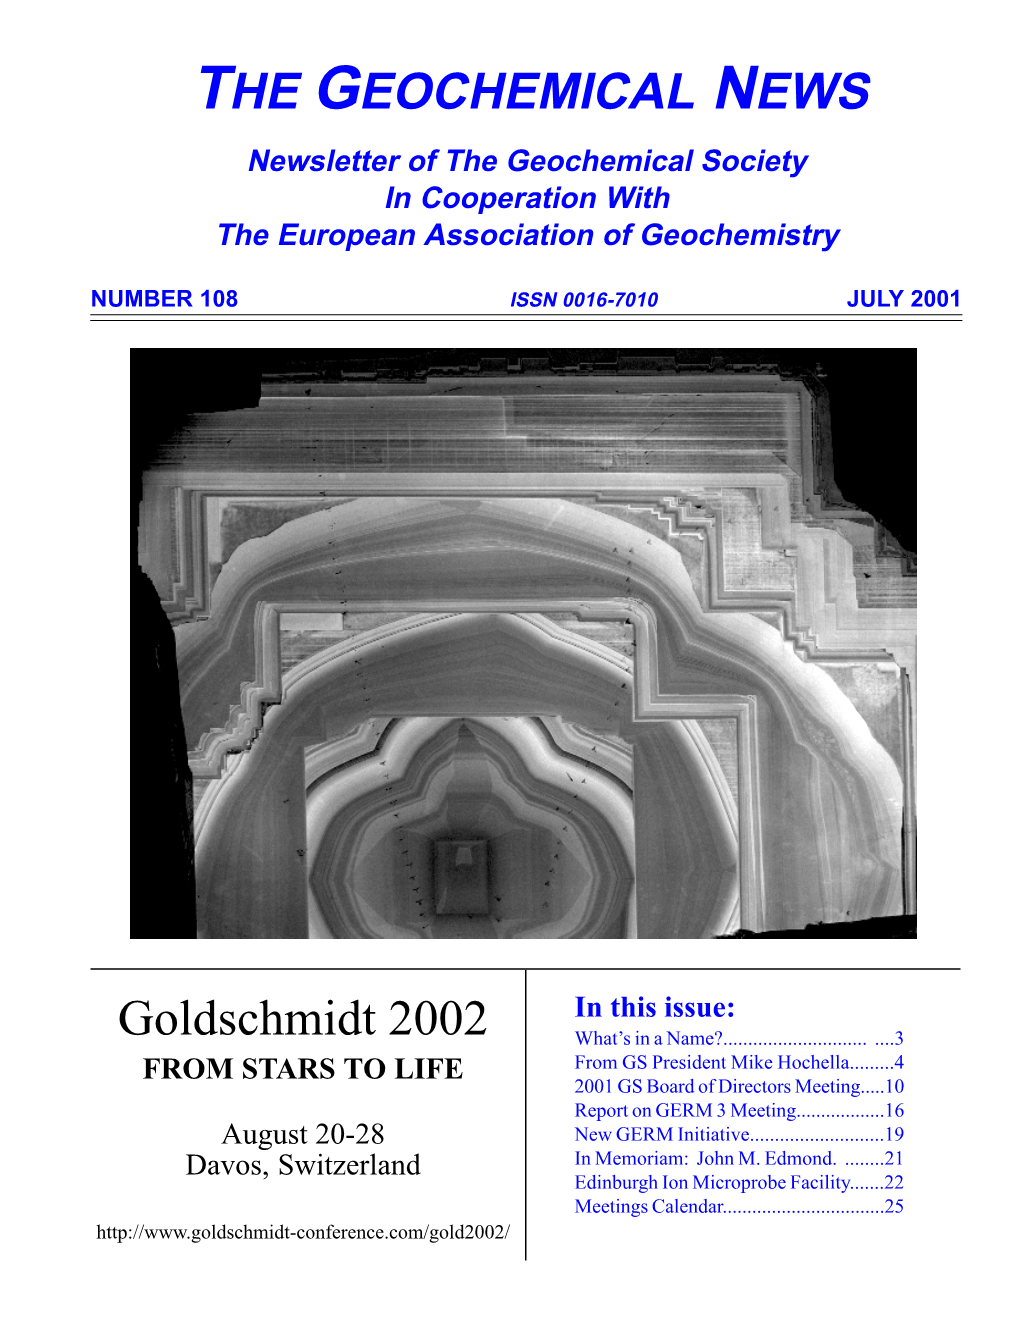 THE GEOCHEMICAL NEWS Newsletter of the Geochemical Society in Cooperation with the European Association of Geochemistry